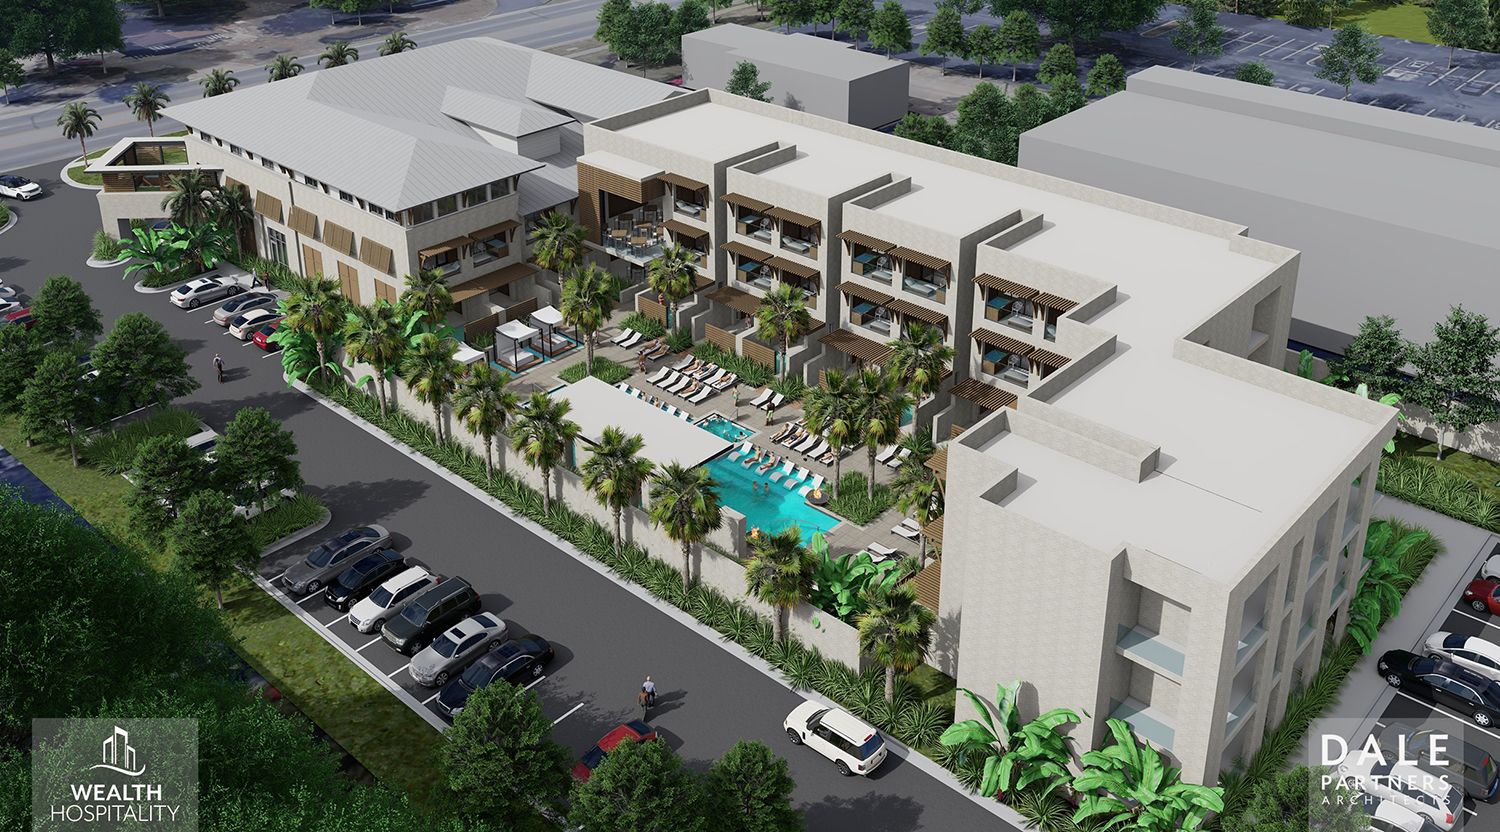 An Aqua Suites boutique hotel is planning for Gulf Shores, Alabama.